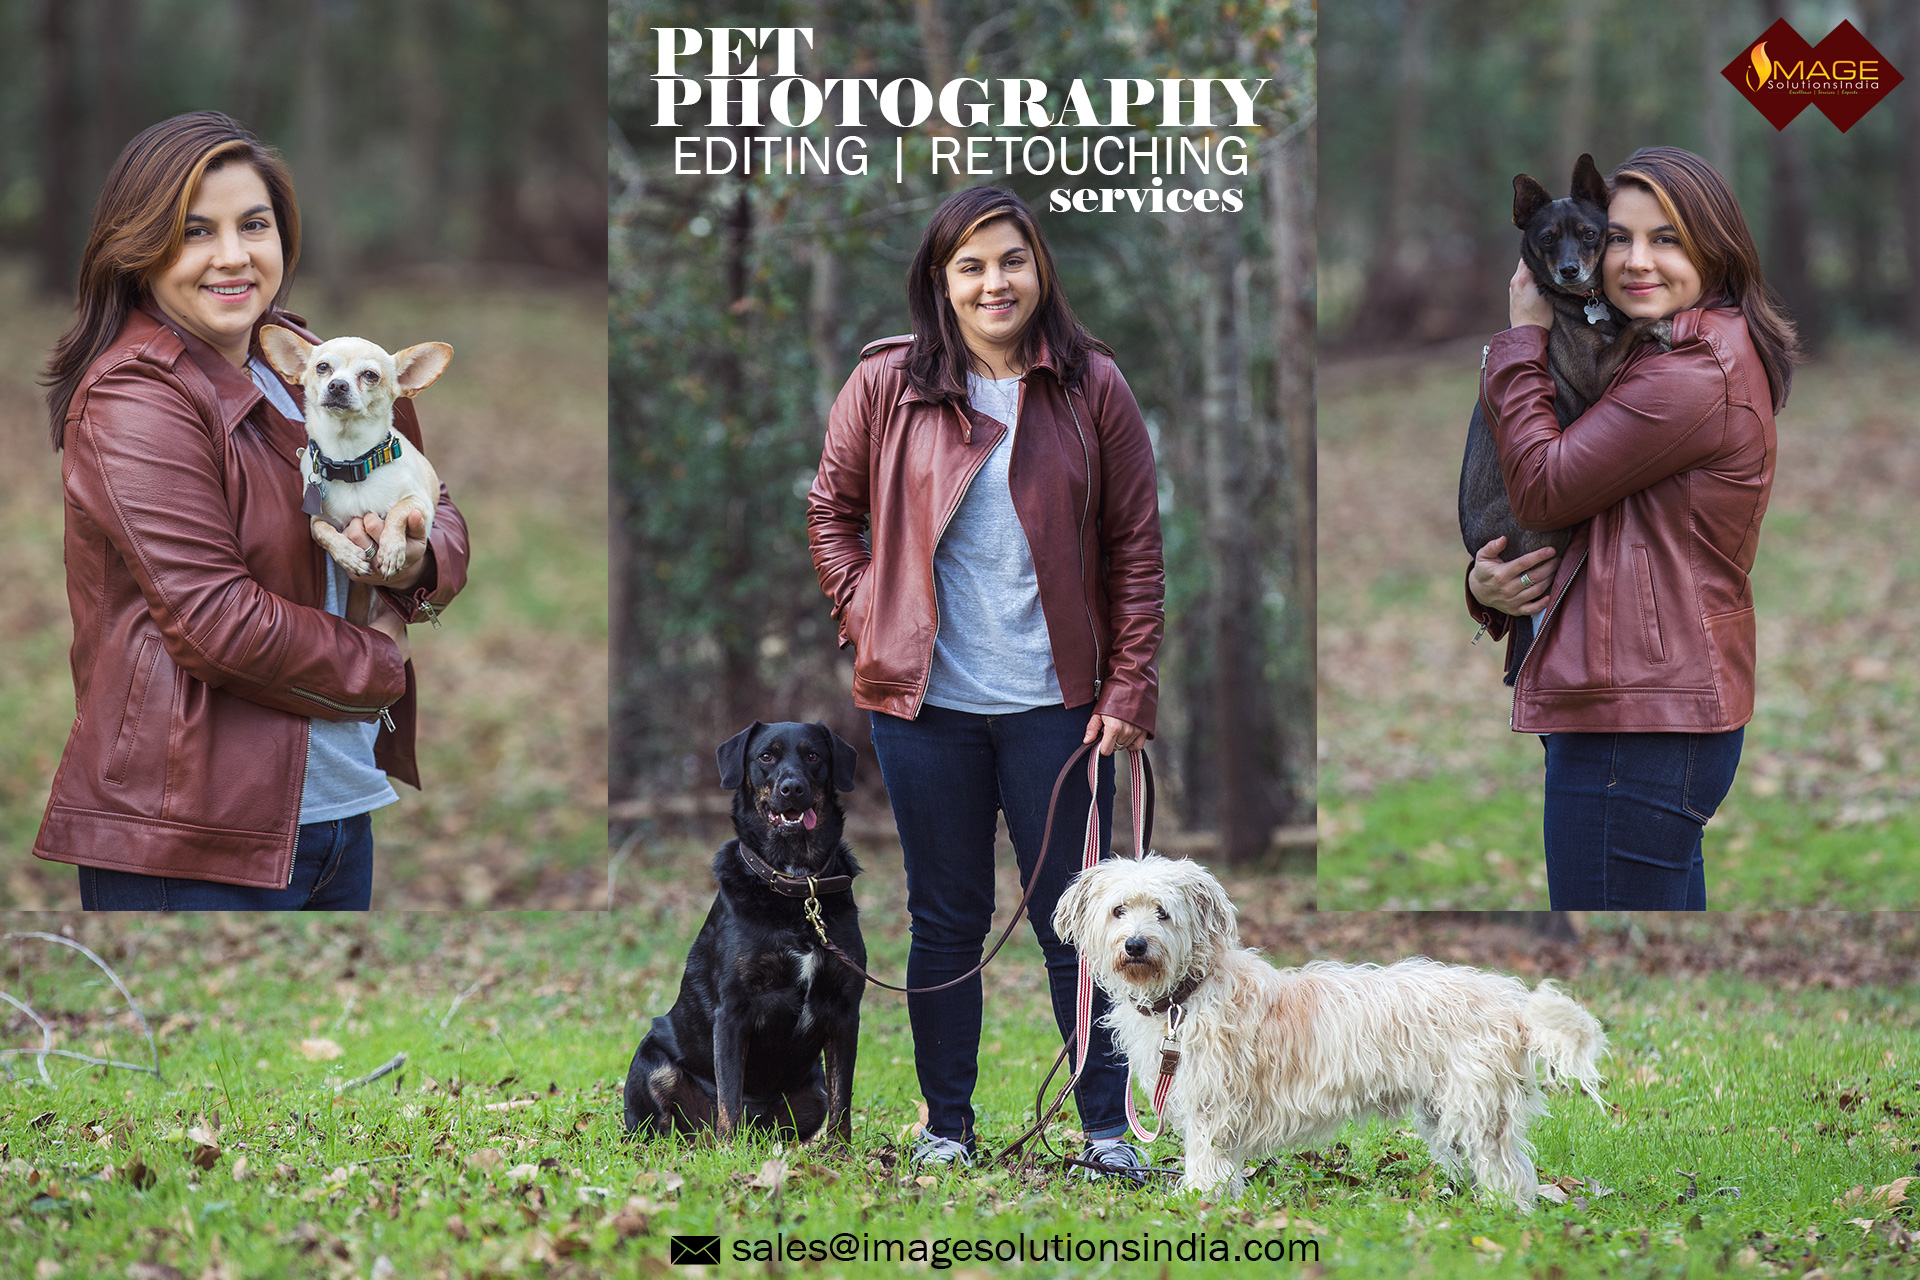 Pet Photo Editing Services | Animal Photography Retouching Services | Pet Animal Photo Retouching